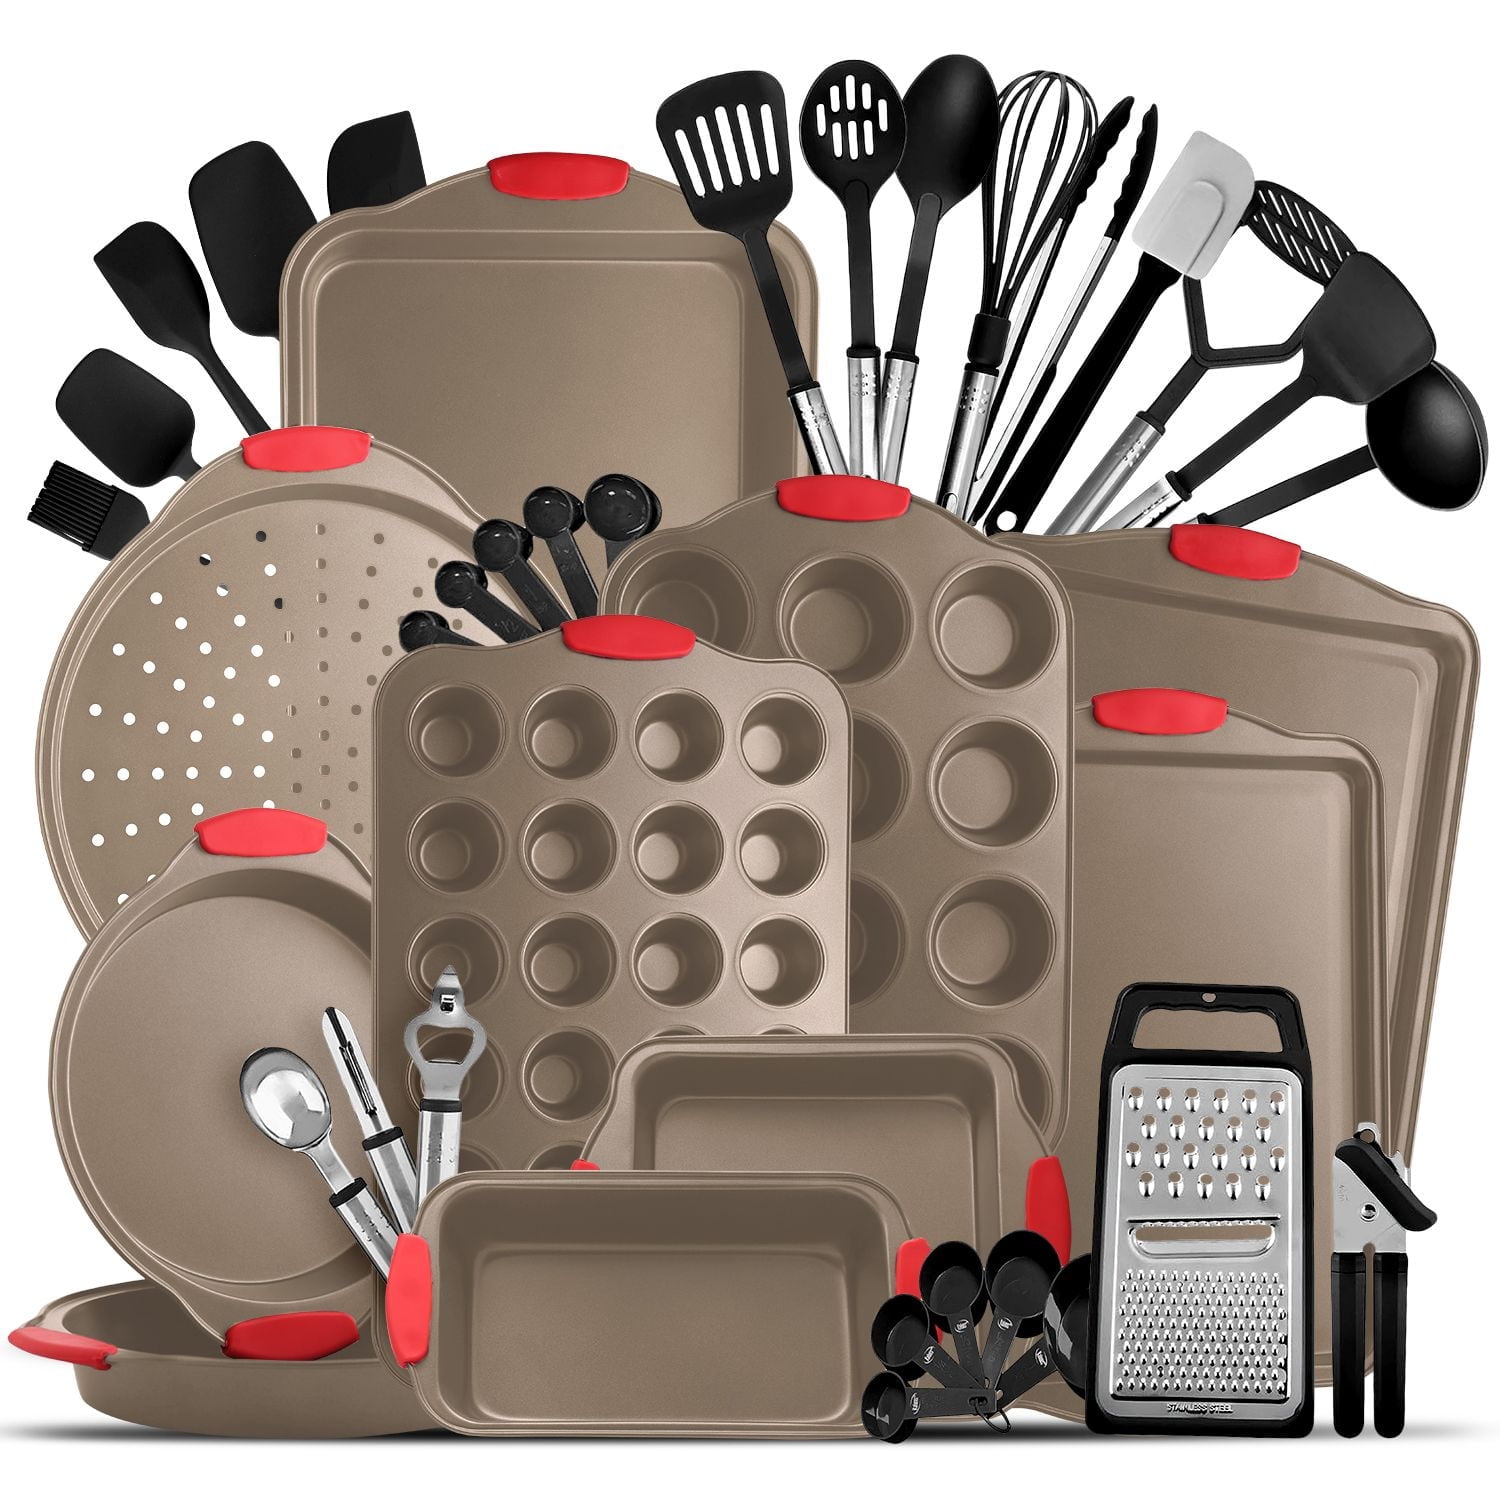 Eatex 39-Piece Nonstick Black Steel Bakeware Set with Black Utensil and Silicone Handles